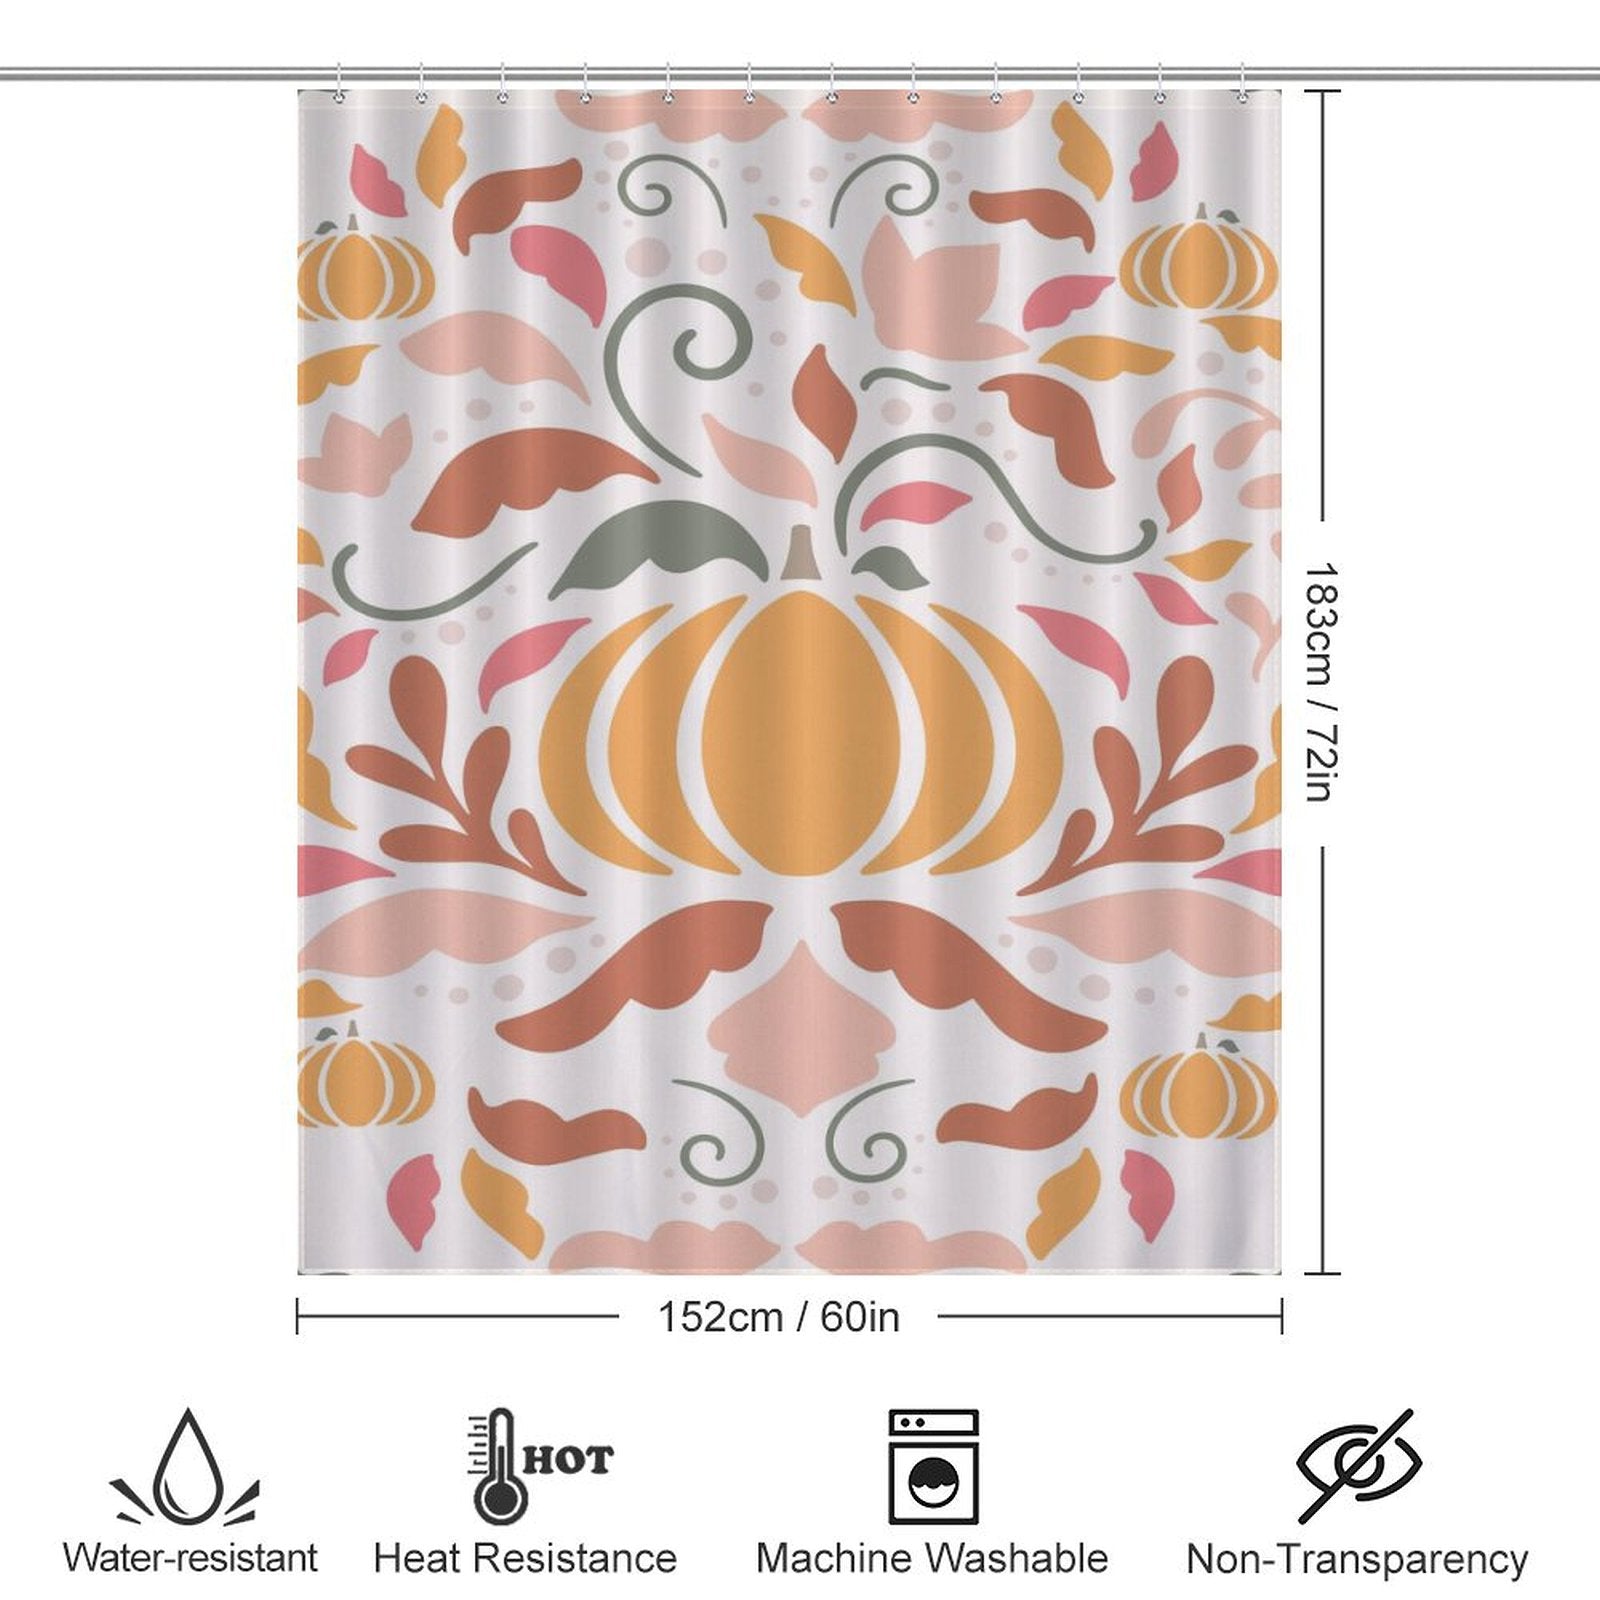 A Boho Fall Pumpkins Pink Floral Shower Curtain-Cottoncat by Cotton Cat with a vibrant pumpkin and leaf pattern. Dimensions are 183 cm by 152 cm. Icons indicate it is water-resistant, has heat resistance, is machine washable, and non-transparent.